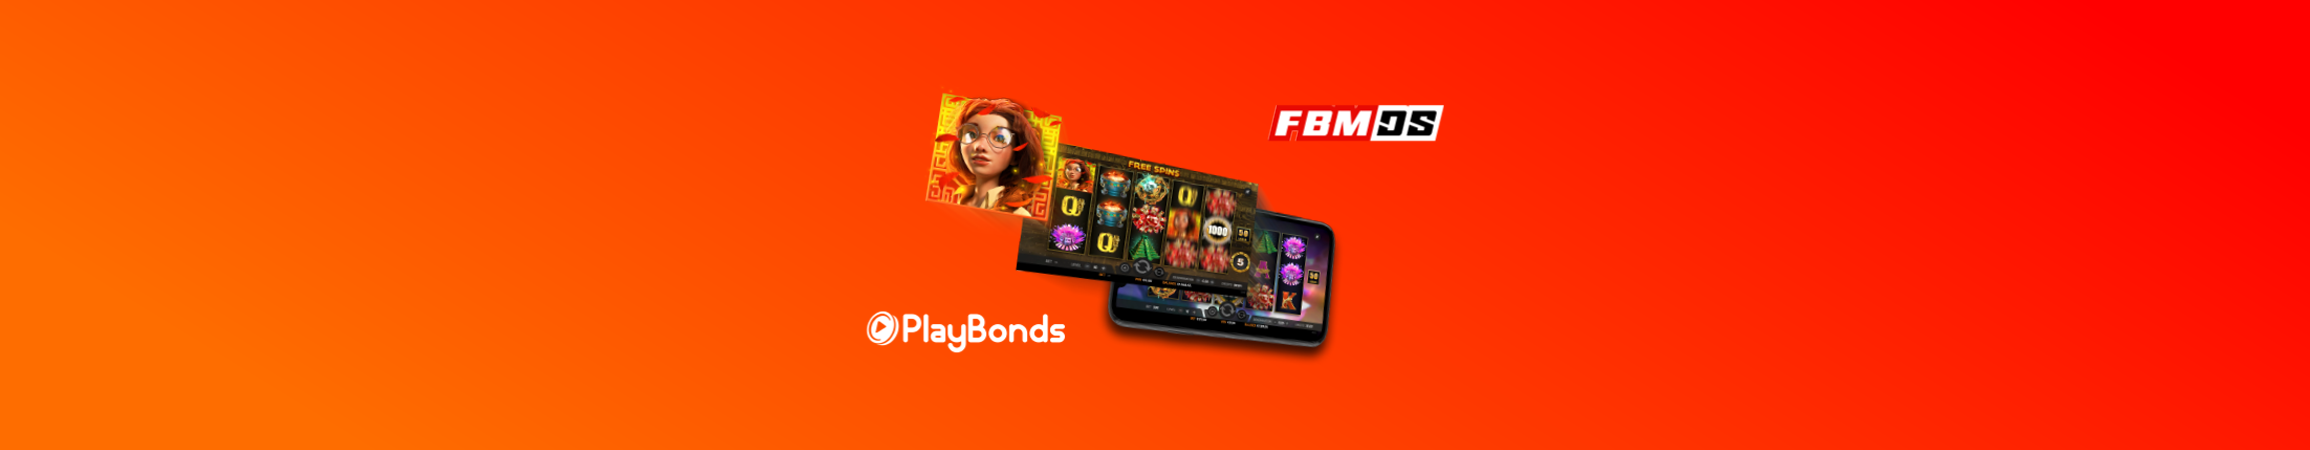 FBM online games are now available at Playbonds.com